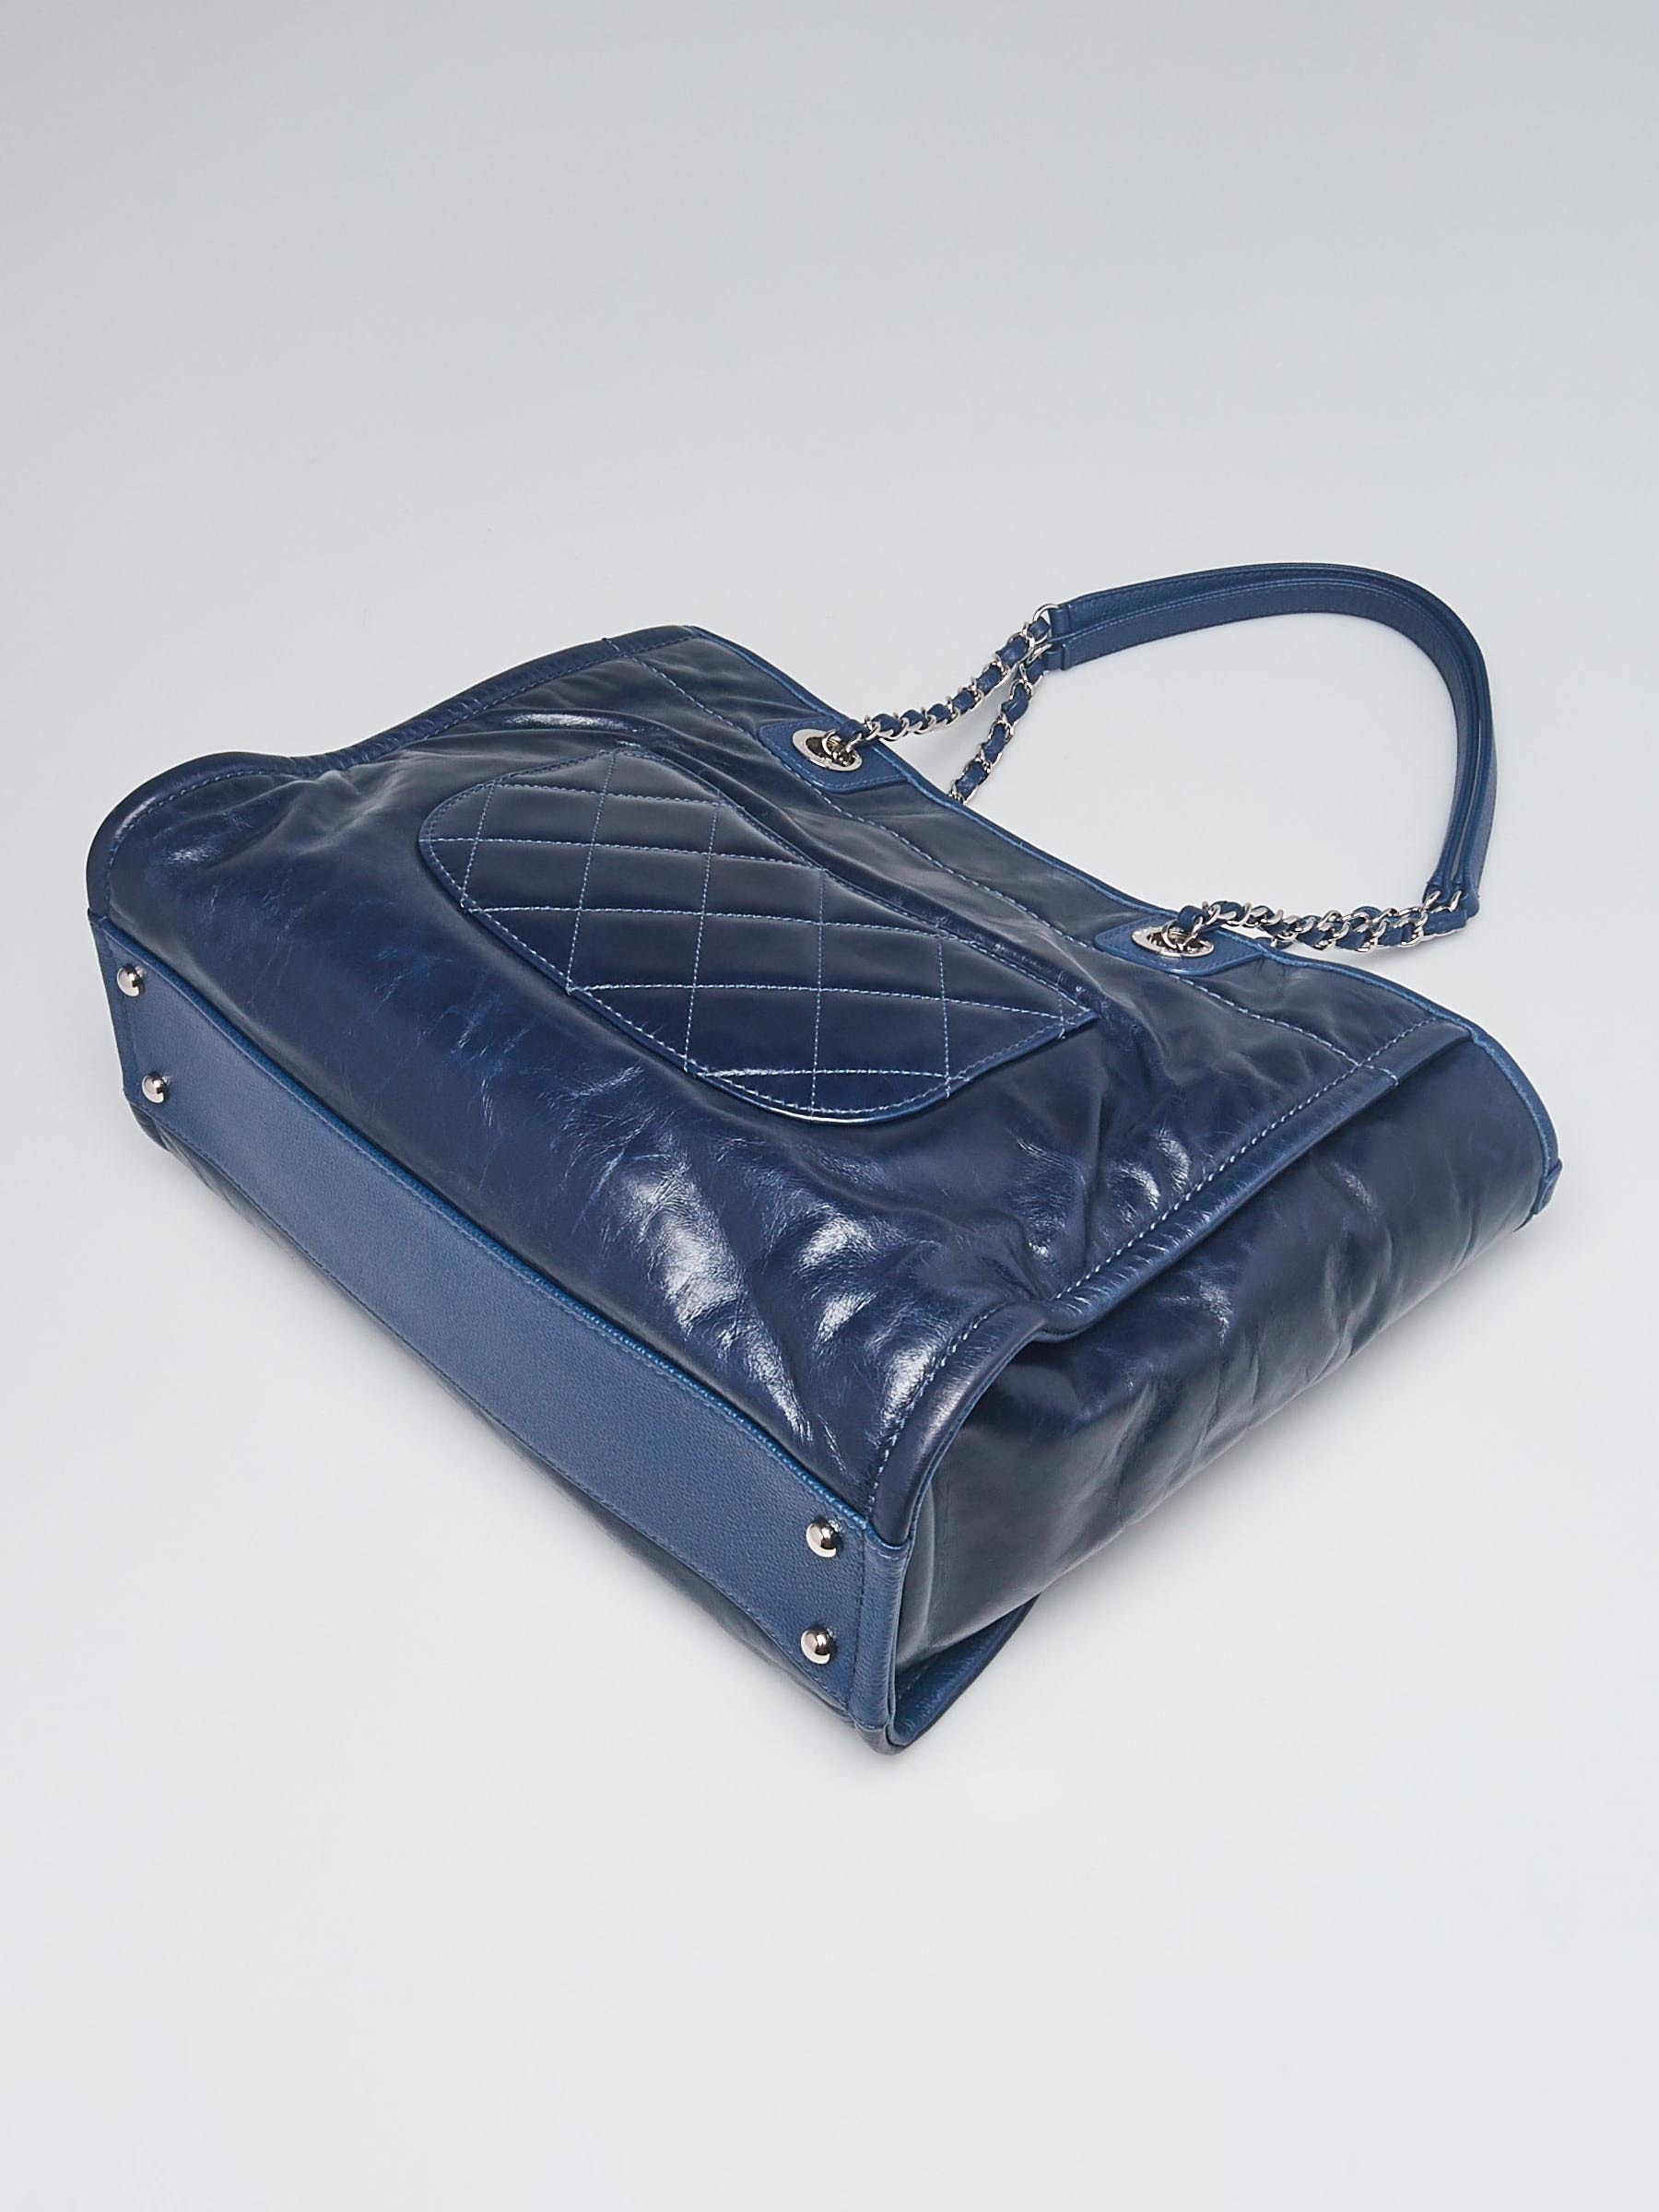 Chanel Deauville Tote in Dark Navy Shiny Calfskin with Silver Hardware -  SOLD